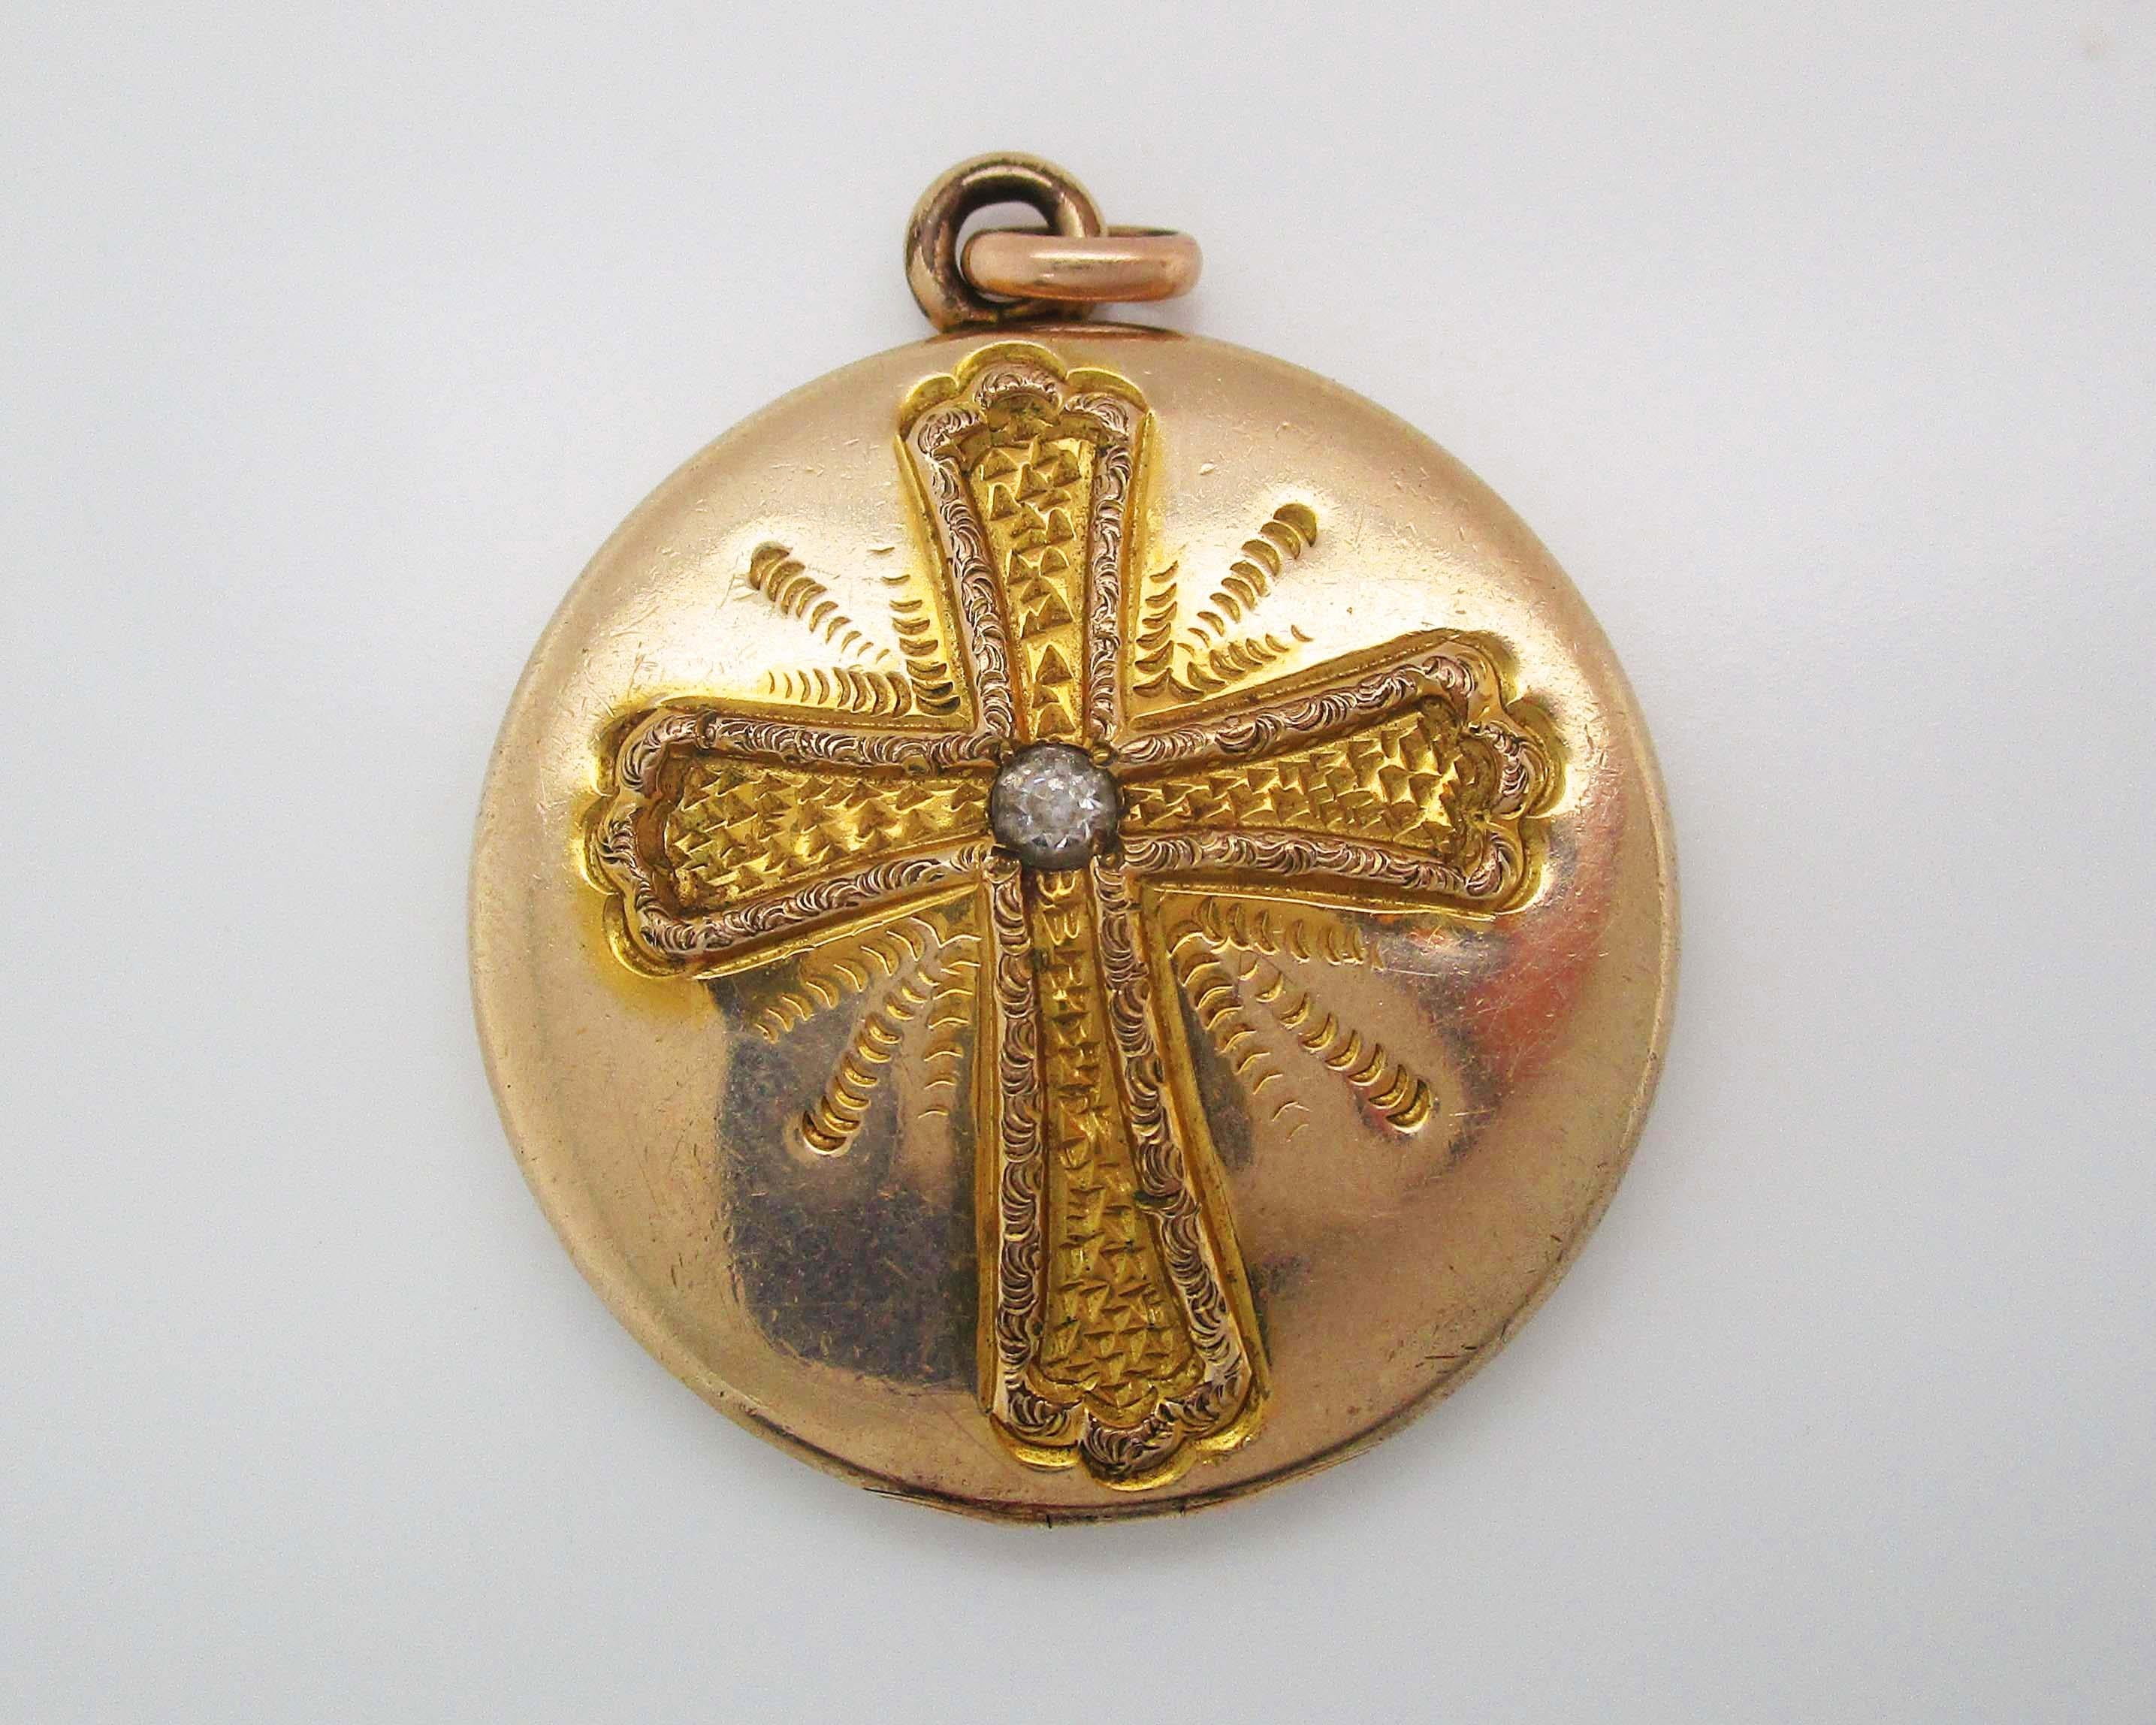 From the treasure troves of the past comes this stunning round two photo gold locket hand engraved with an elegant cross design and set with a beautiful white stone center. The front of the locket bears a lovely textured cross design while the back